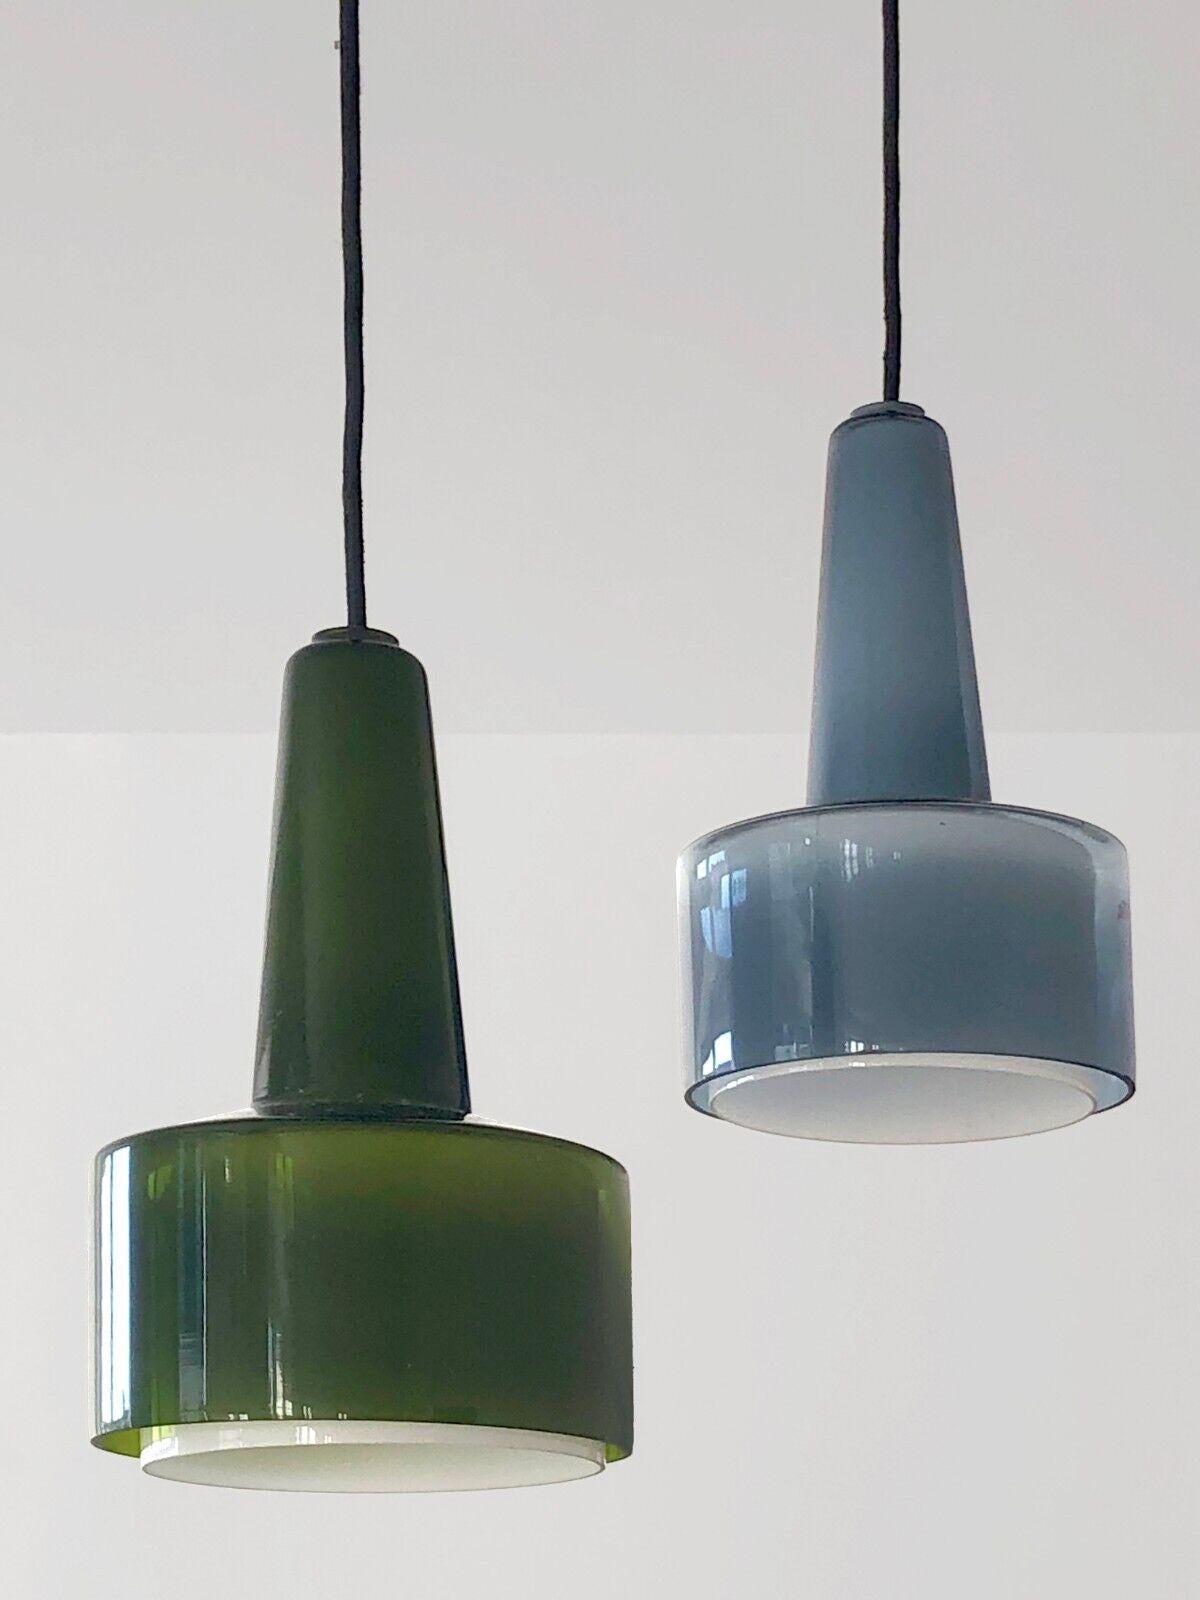 A PAIR of GLASS CEILING FIXTURES by BENT NORDSTED, for FOG&MORUP, Denmark 1960 For Sale 6